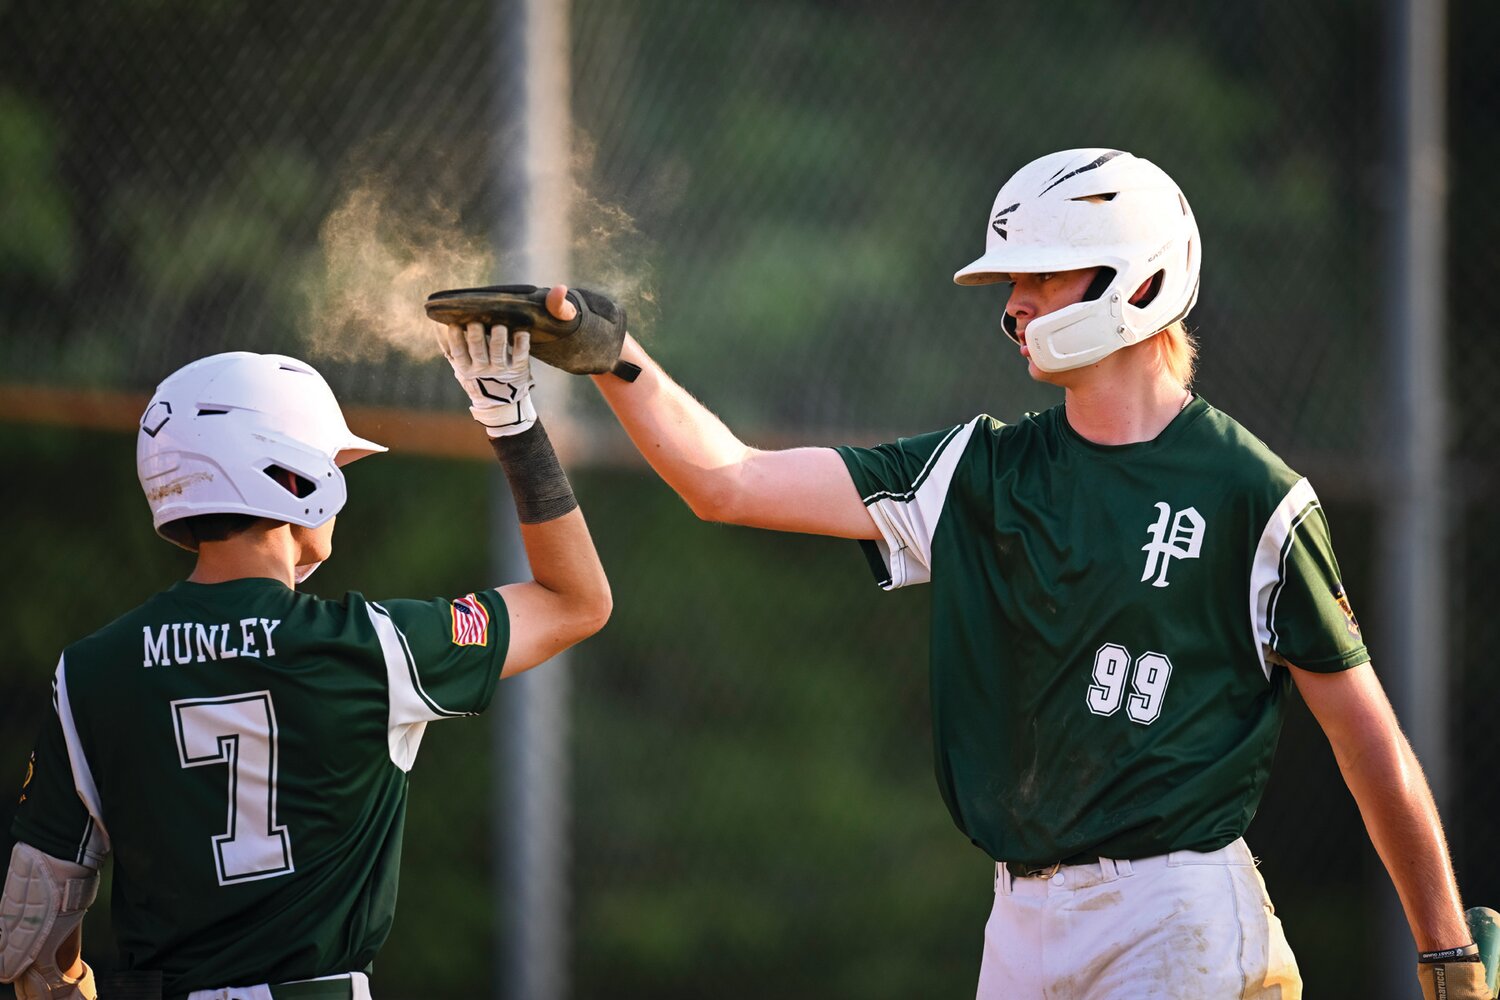 Pennridge’s Connor Smith, right, gets a high five from Will Munley after scoring in the four-run second inning.